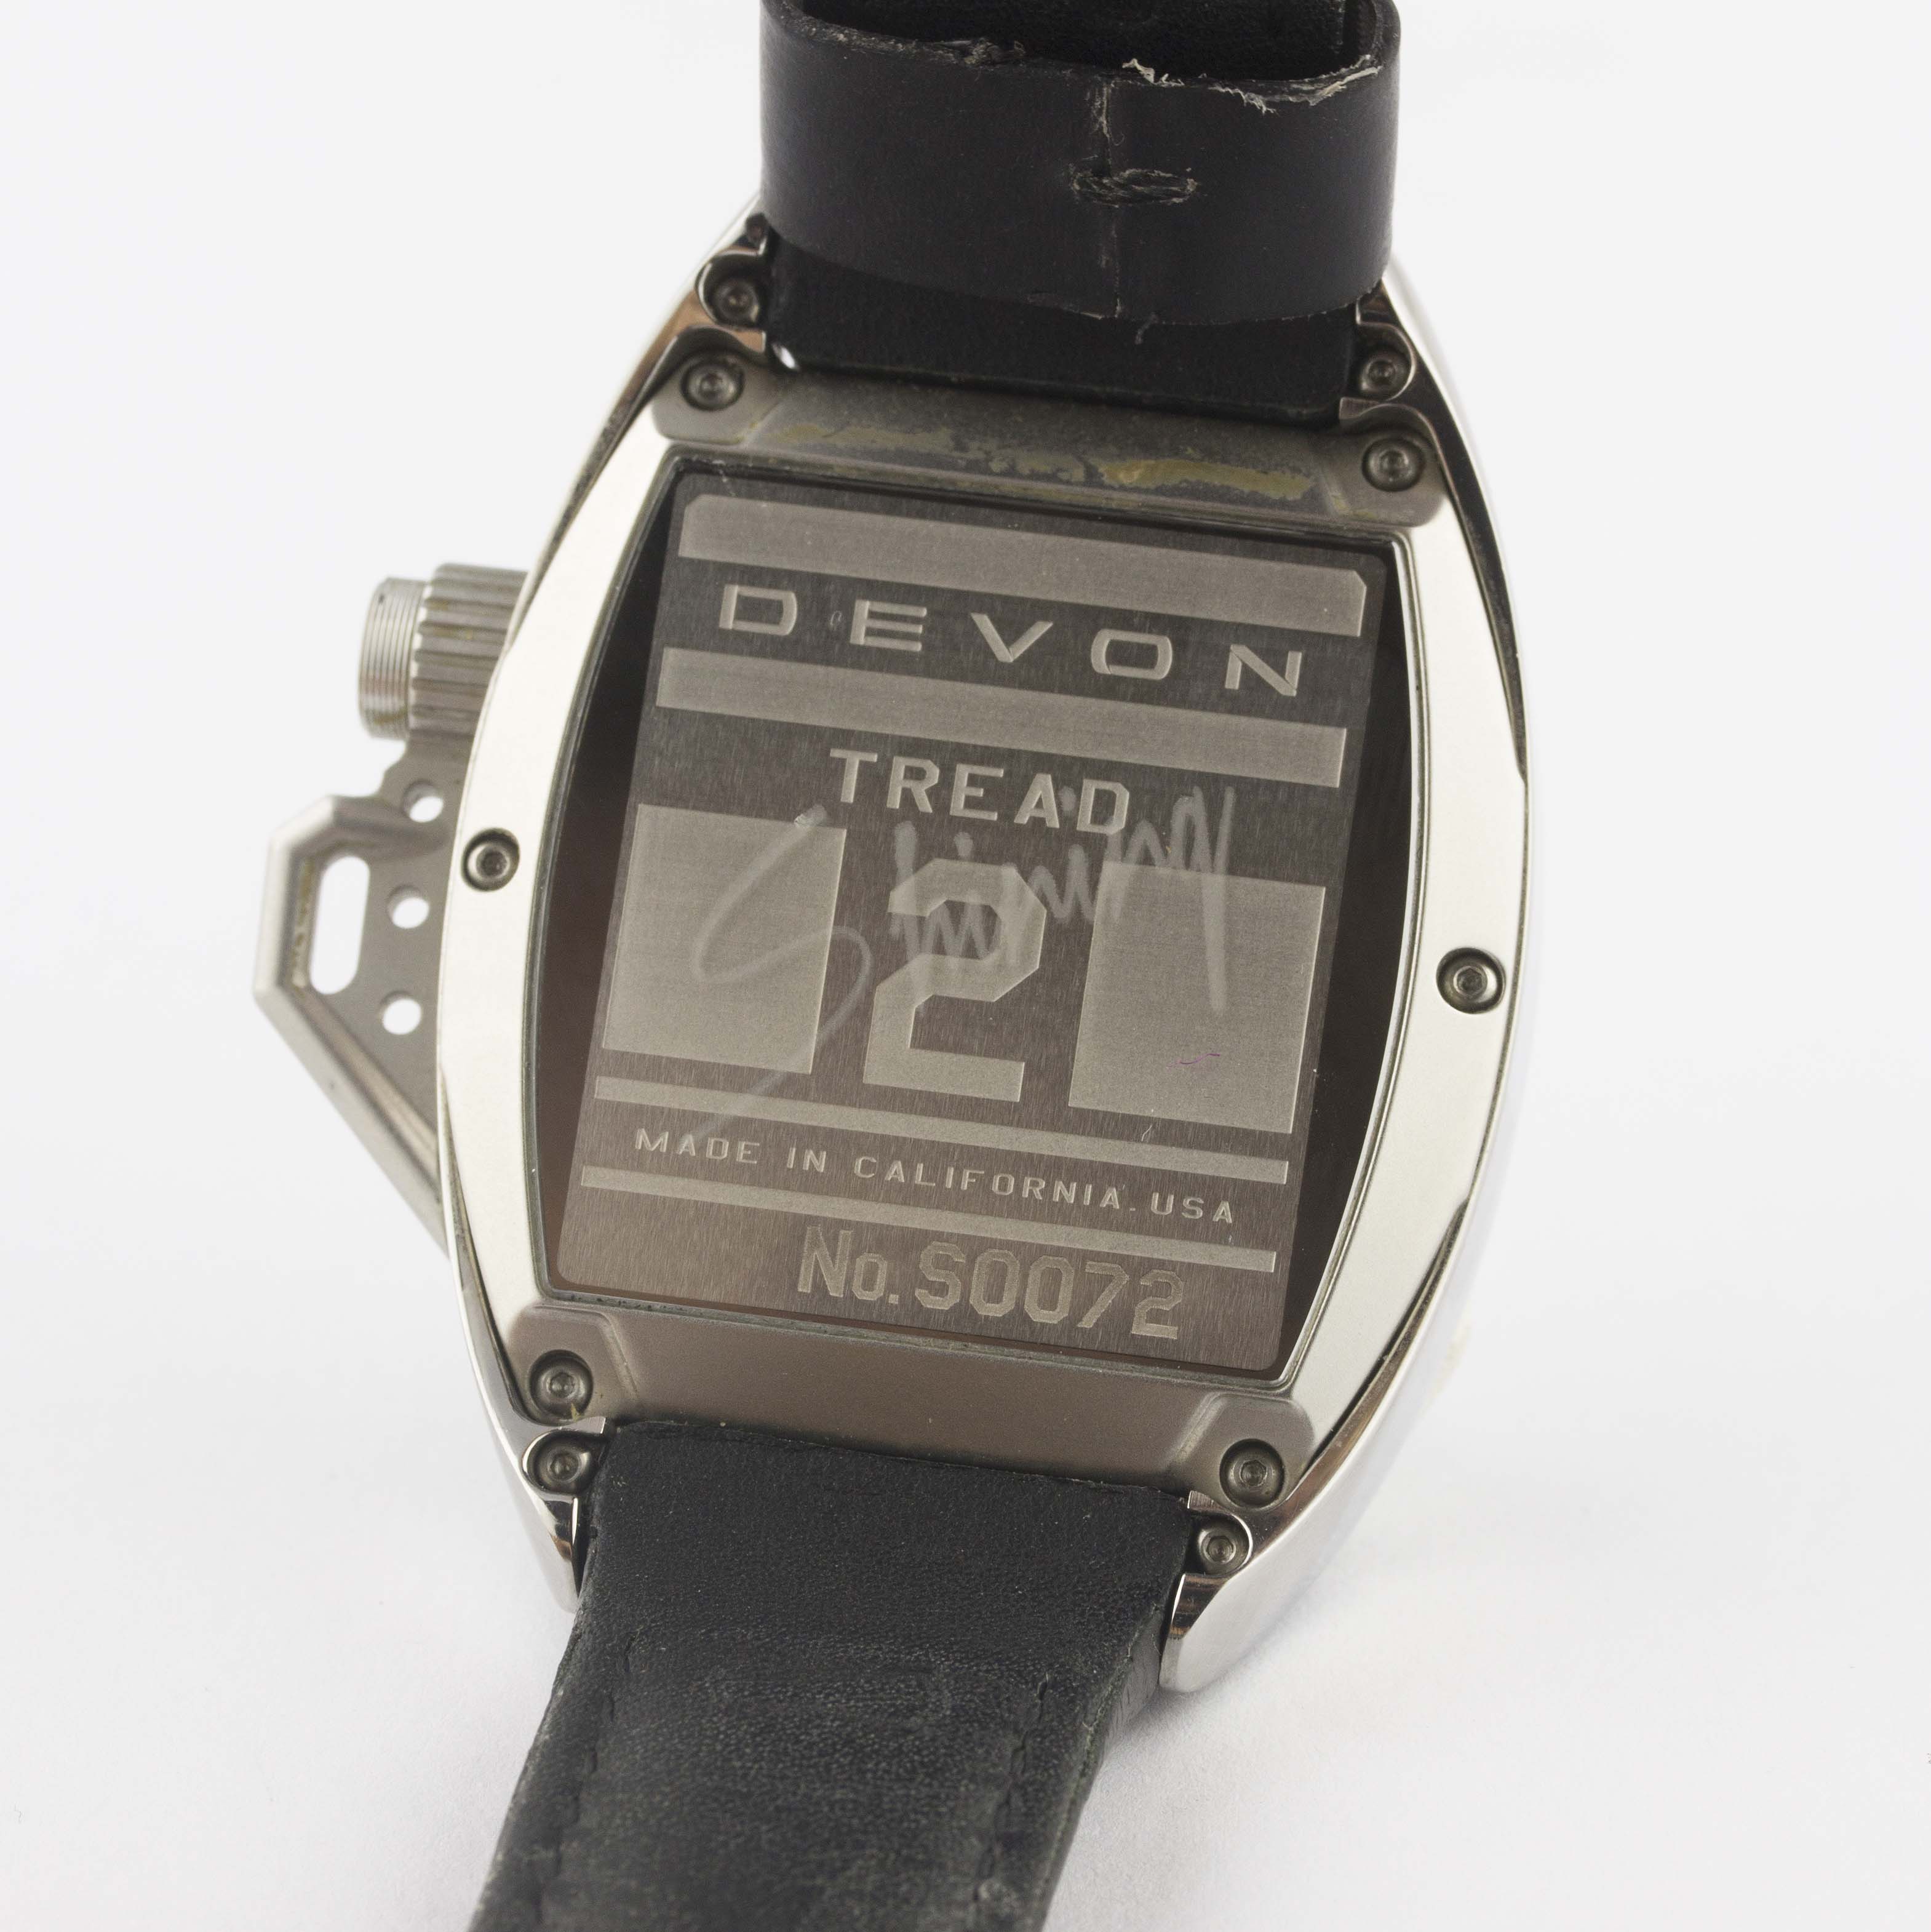 A GENTLEMAN'S STAINLESS STEEL DEVON TREAD 2 TIME BELT SHINING WRIST WATCH DATED 2014, WITH - Image 6 of 8